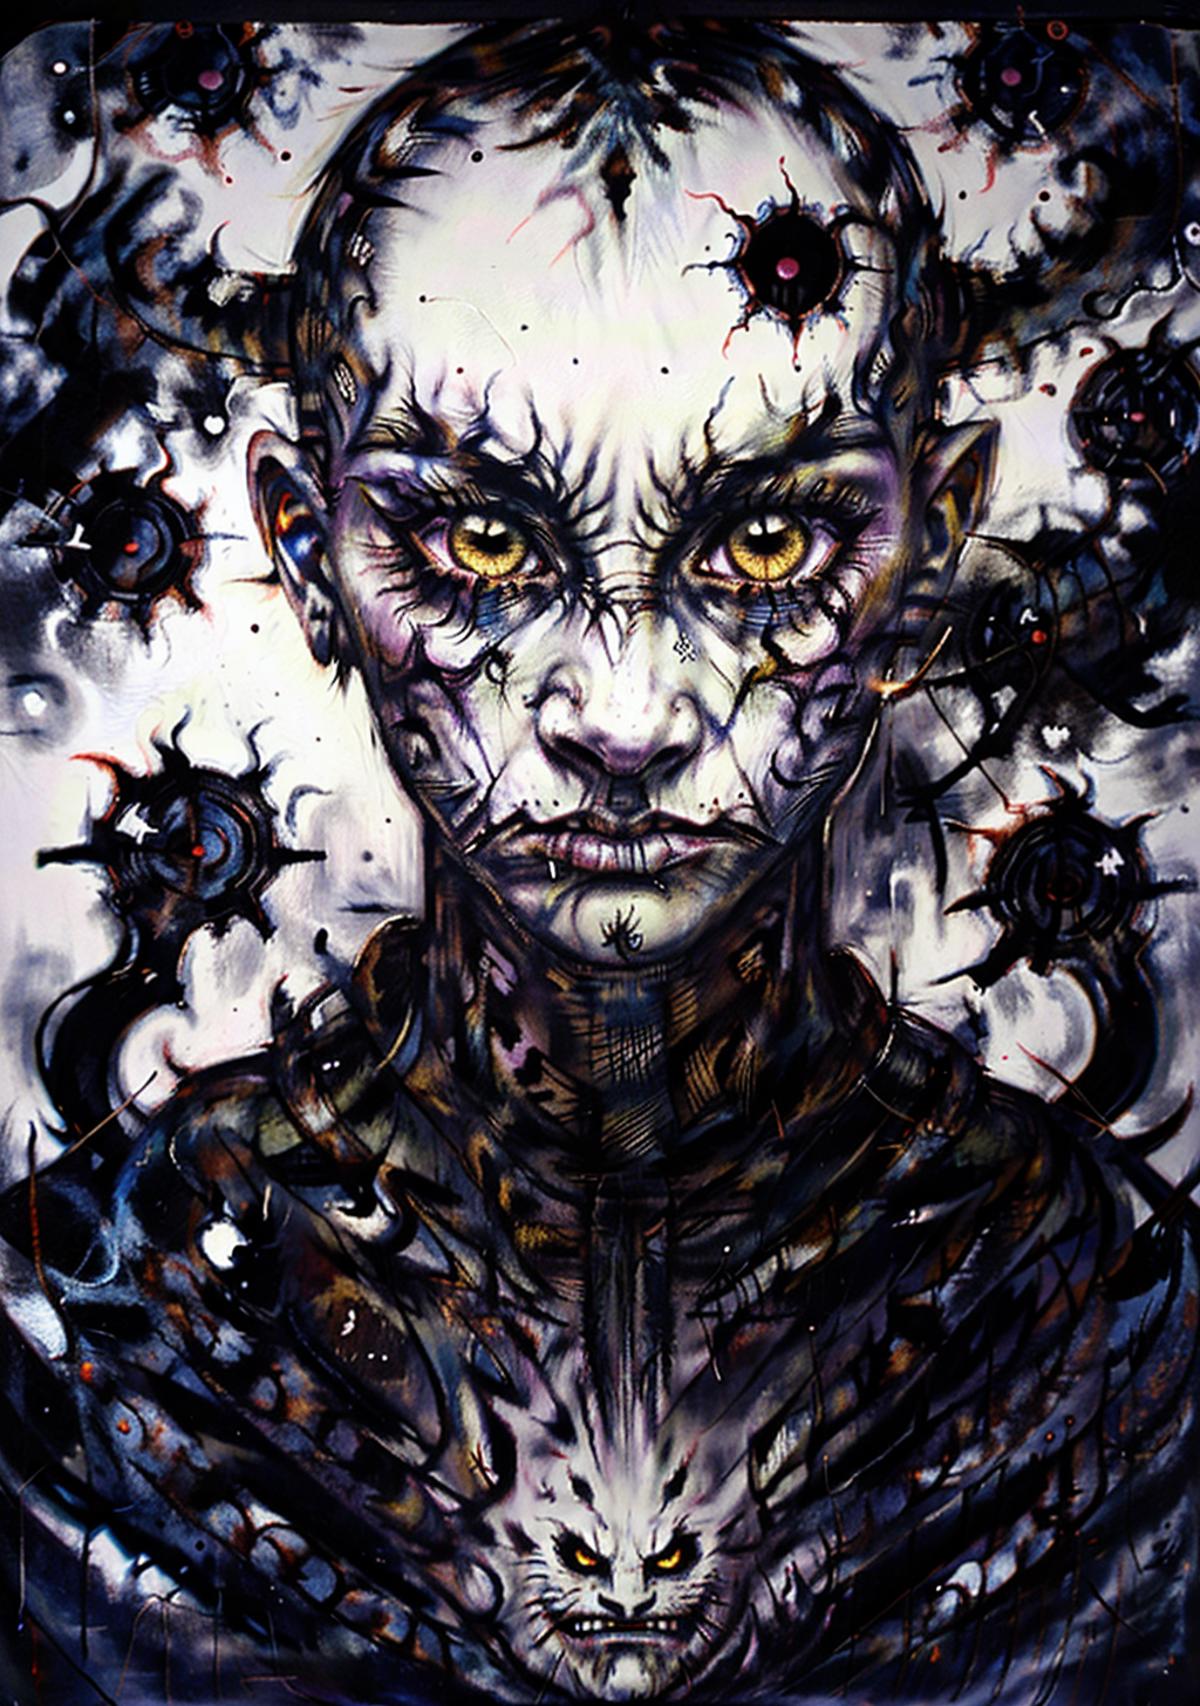 CBarkerAI - Art style inspired by Clive Barker image by pAInCREAT0R